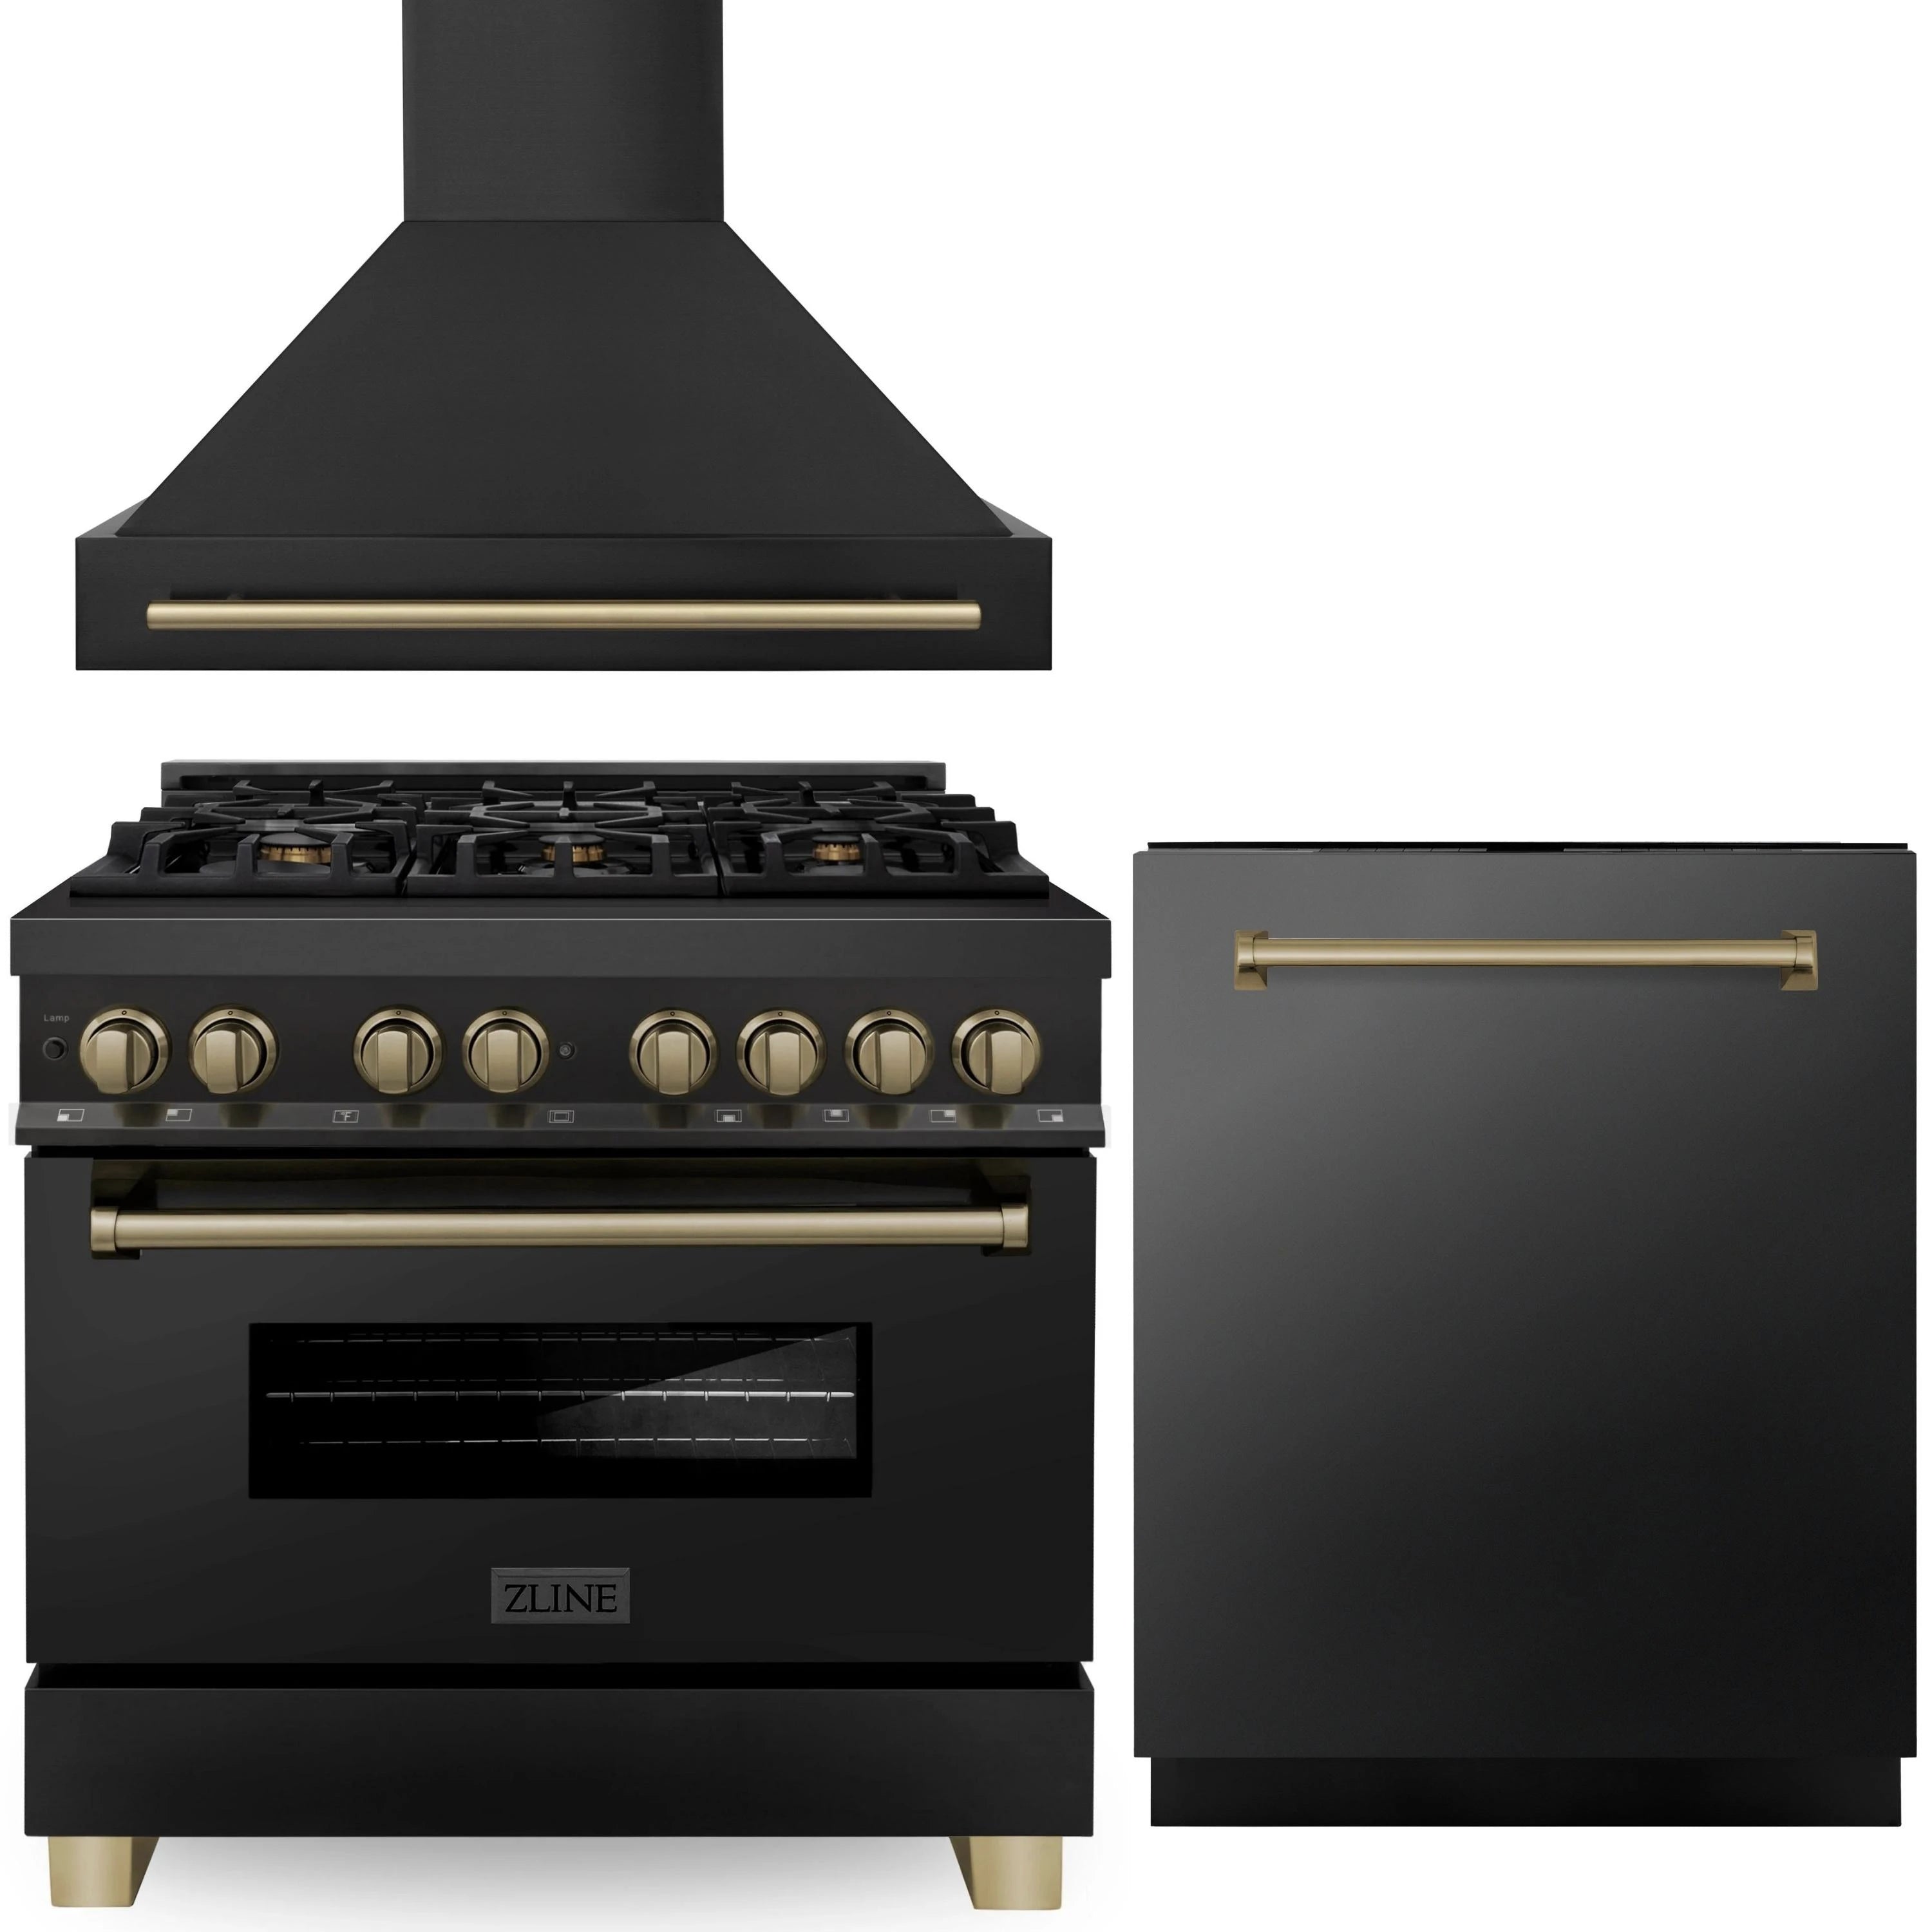 ZLINE Autograph Edition 3-Piece Appliance Package - 36-Inch Dual Fuel Range, Wall Mounted Range Hood, & 24-Inch Tall Tub Dishwasher in Black Stainless Steel with Champagne Bronze Trim (3AKP-RABRHDWV36-CB)